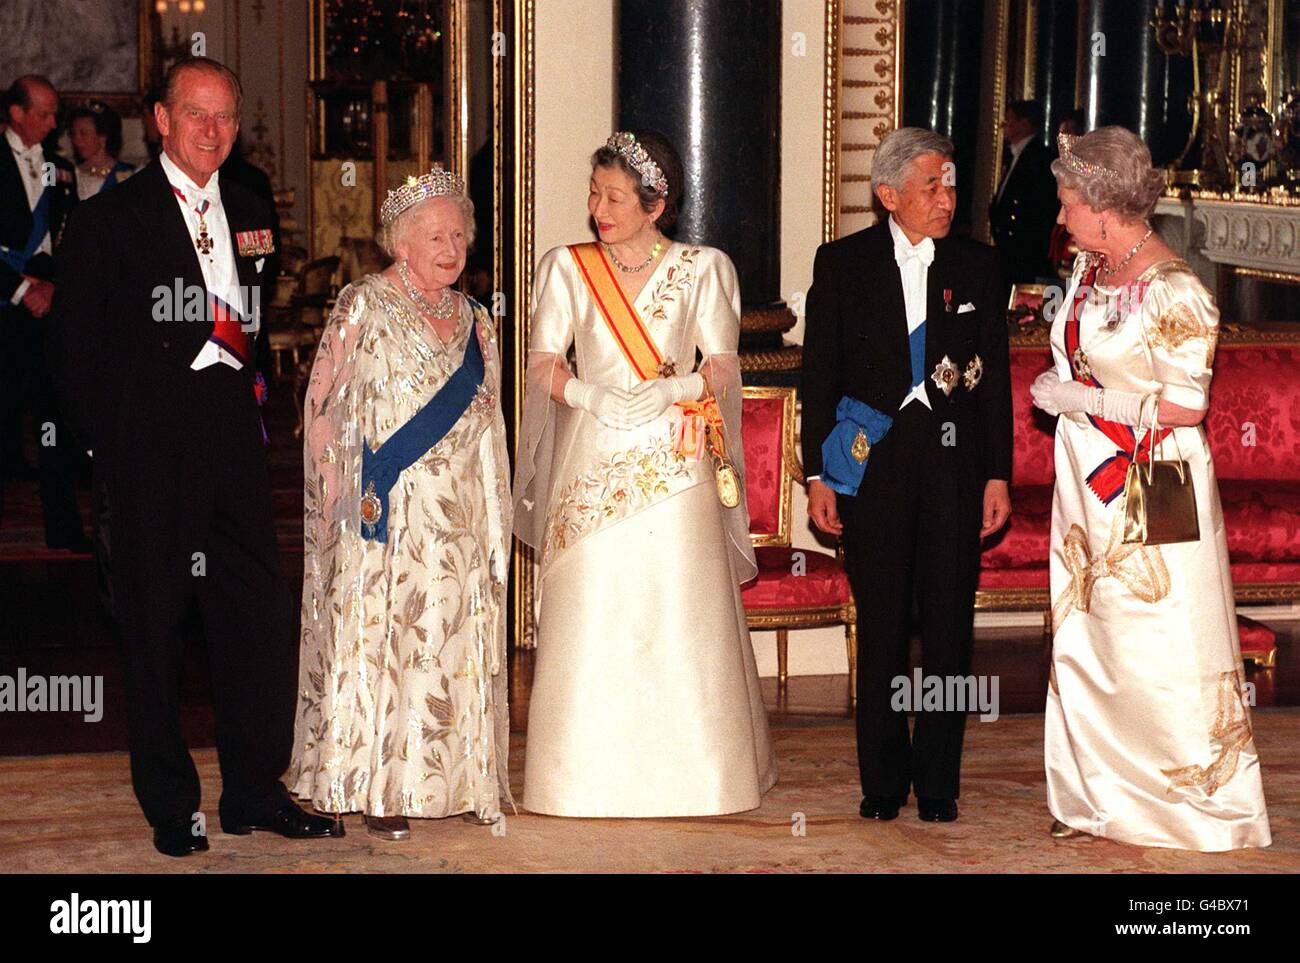 Britain's Queen Elizabeth II (right) and Japanese Emperor Akihito (2nd right) his wife Empress Michiko (centre), The Duke of Edinburgh (left) and Queen Elizabeth The Queen Mother pause for photographers as they arrive at the State Banquet Hall in Buckingham Palace this evening (Tuesday). See PA Story ROYAL Emperor. Photo by John Stillwell/PA. (WPA Rota Pic) Stock Photo